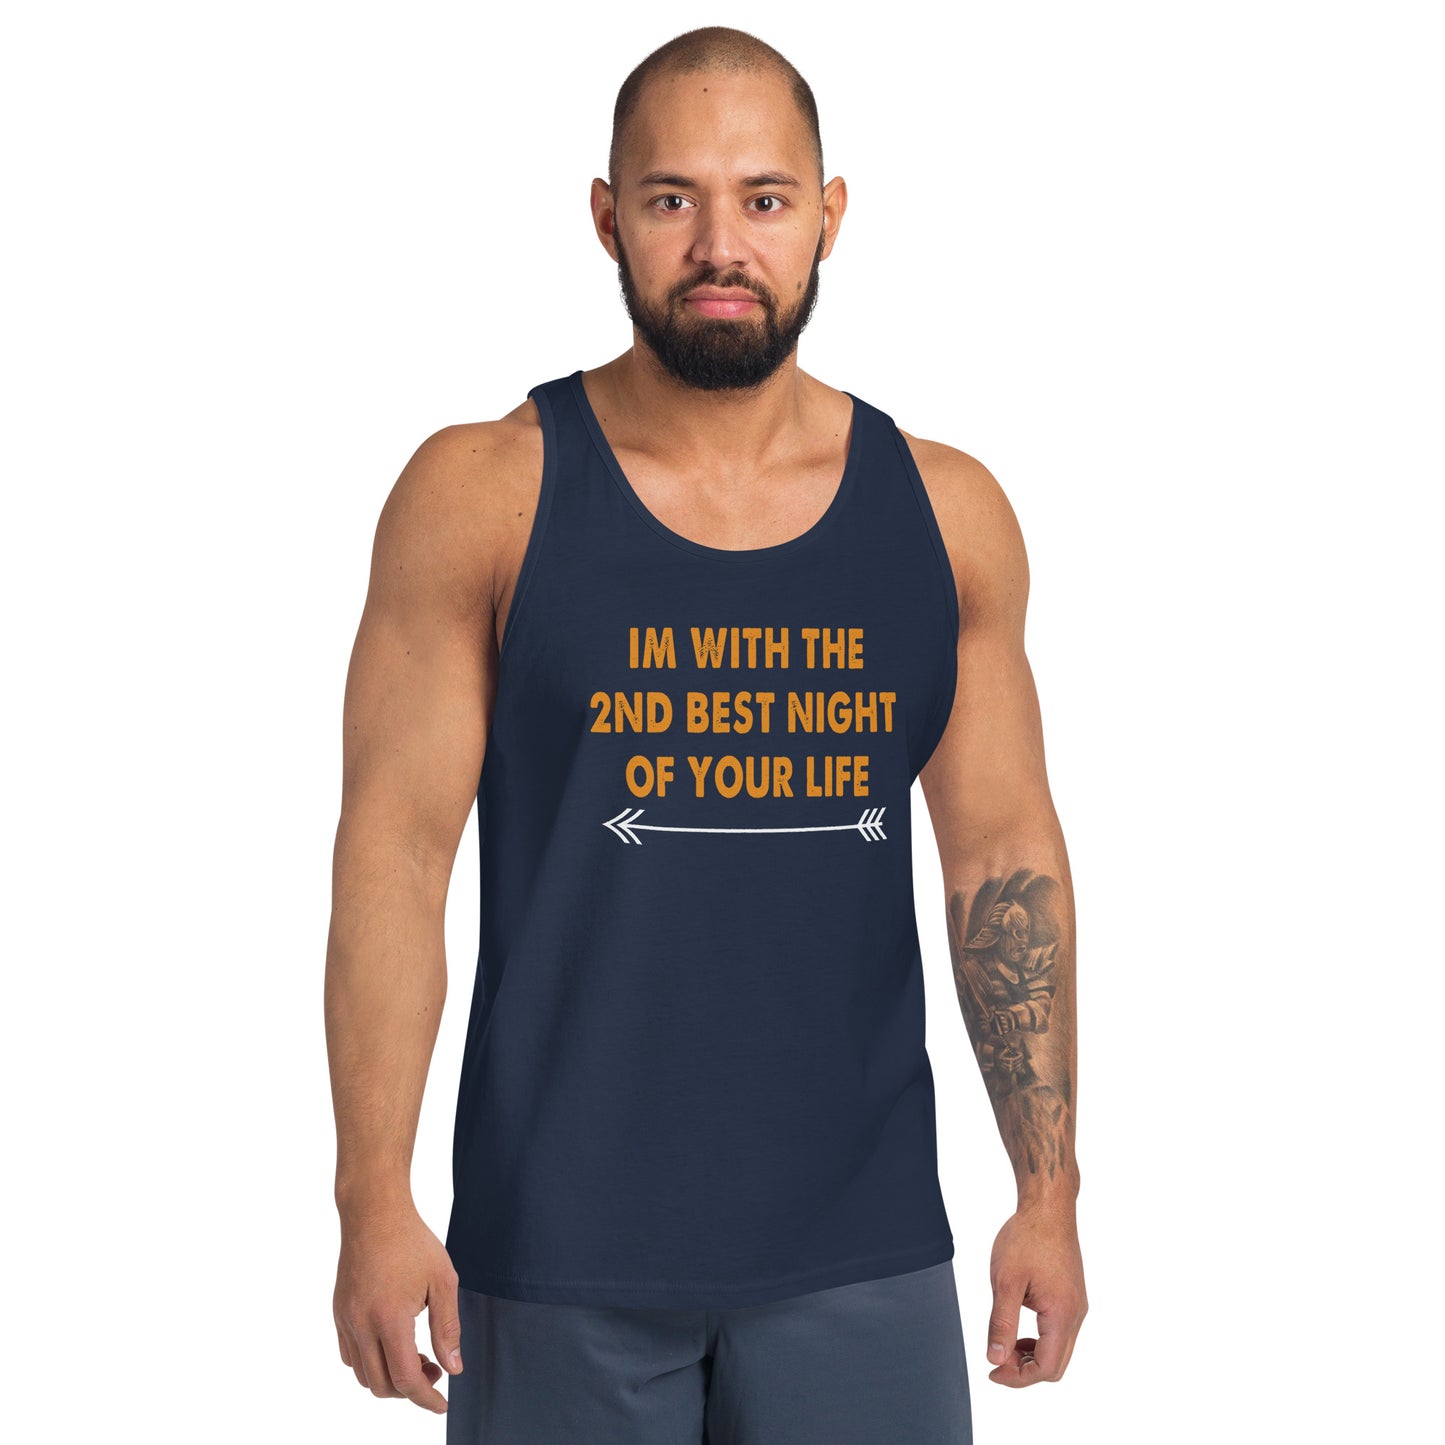 I am with the 2nd best night of your life Men's Tank Top